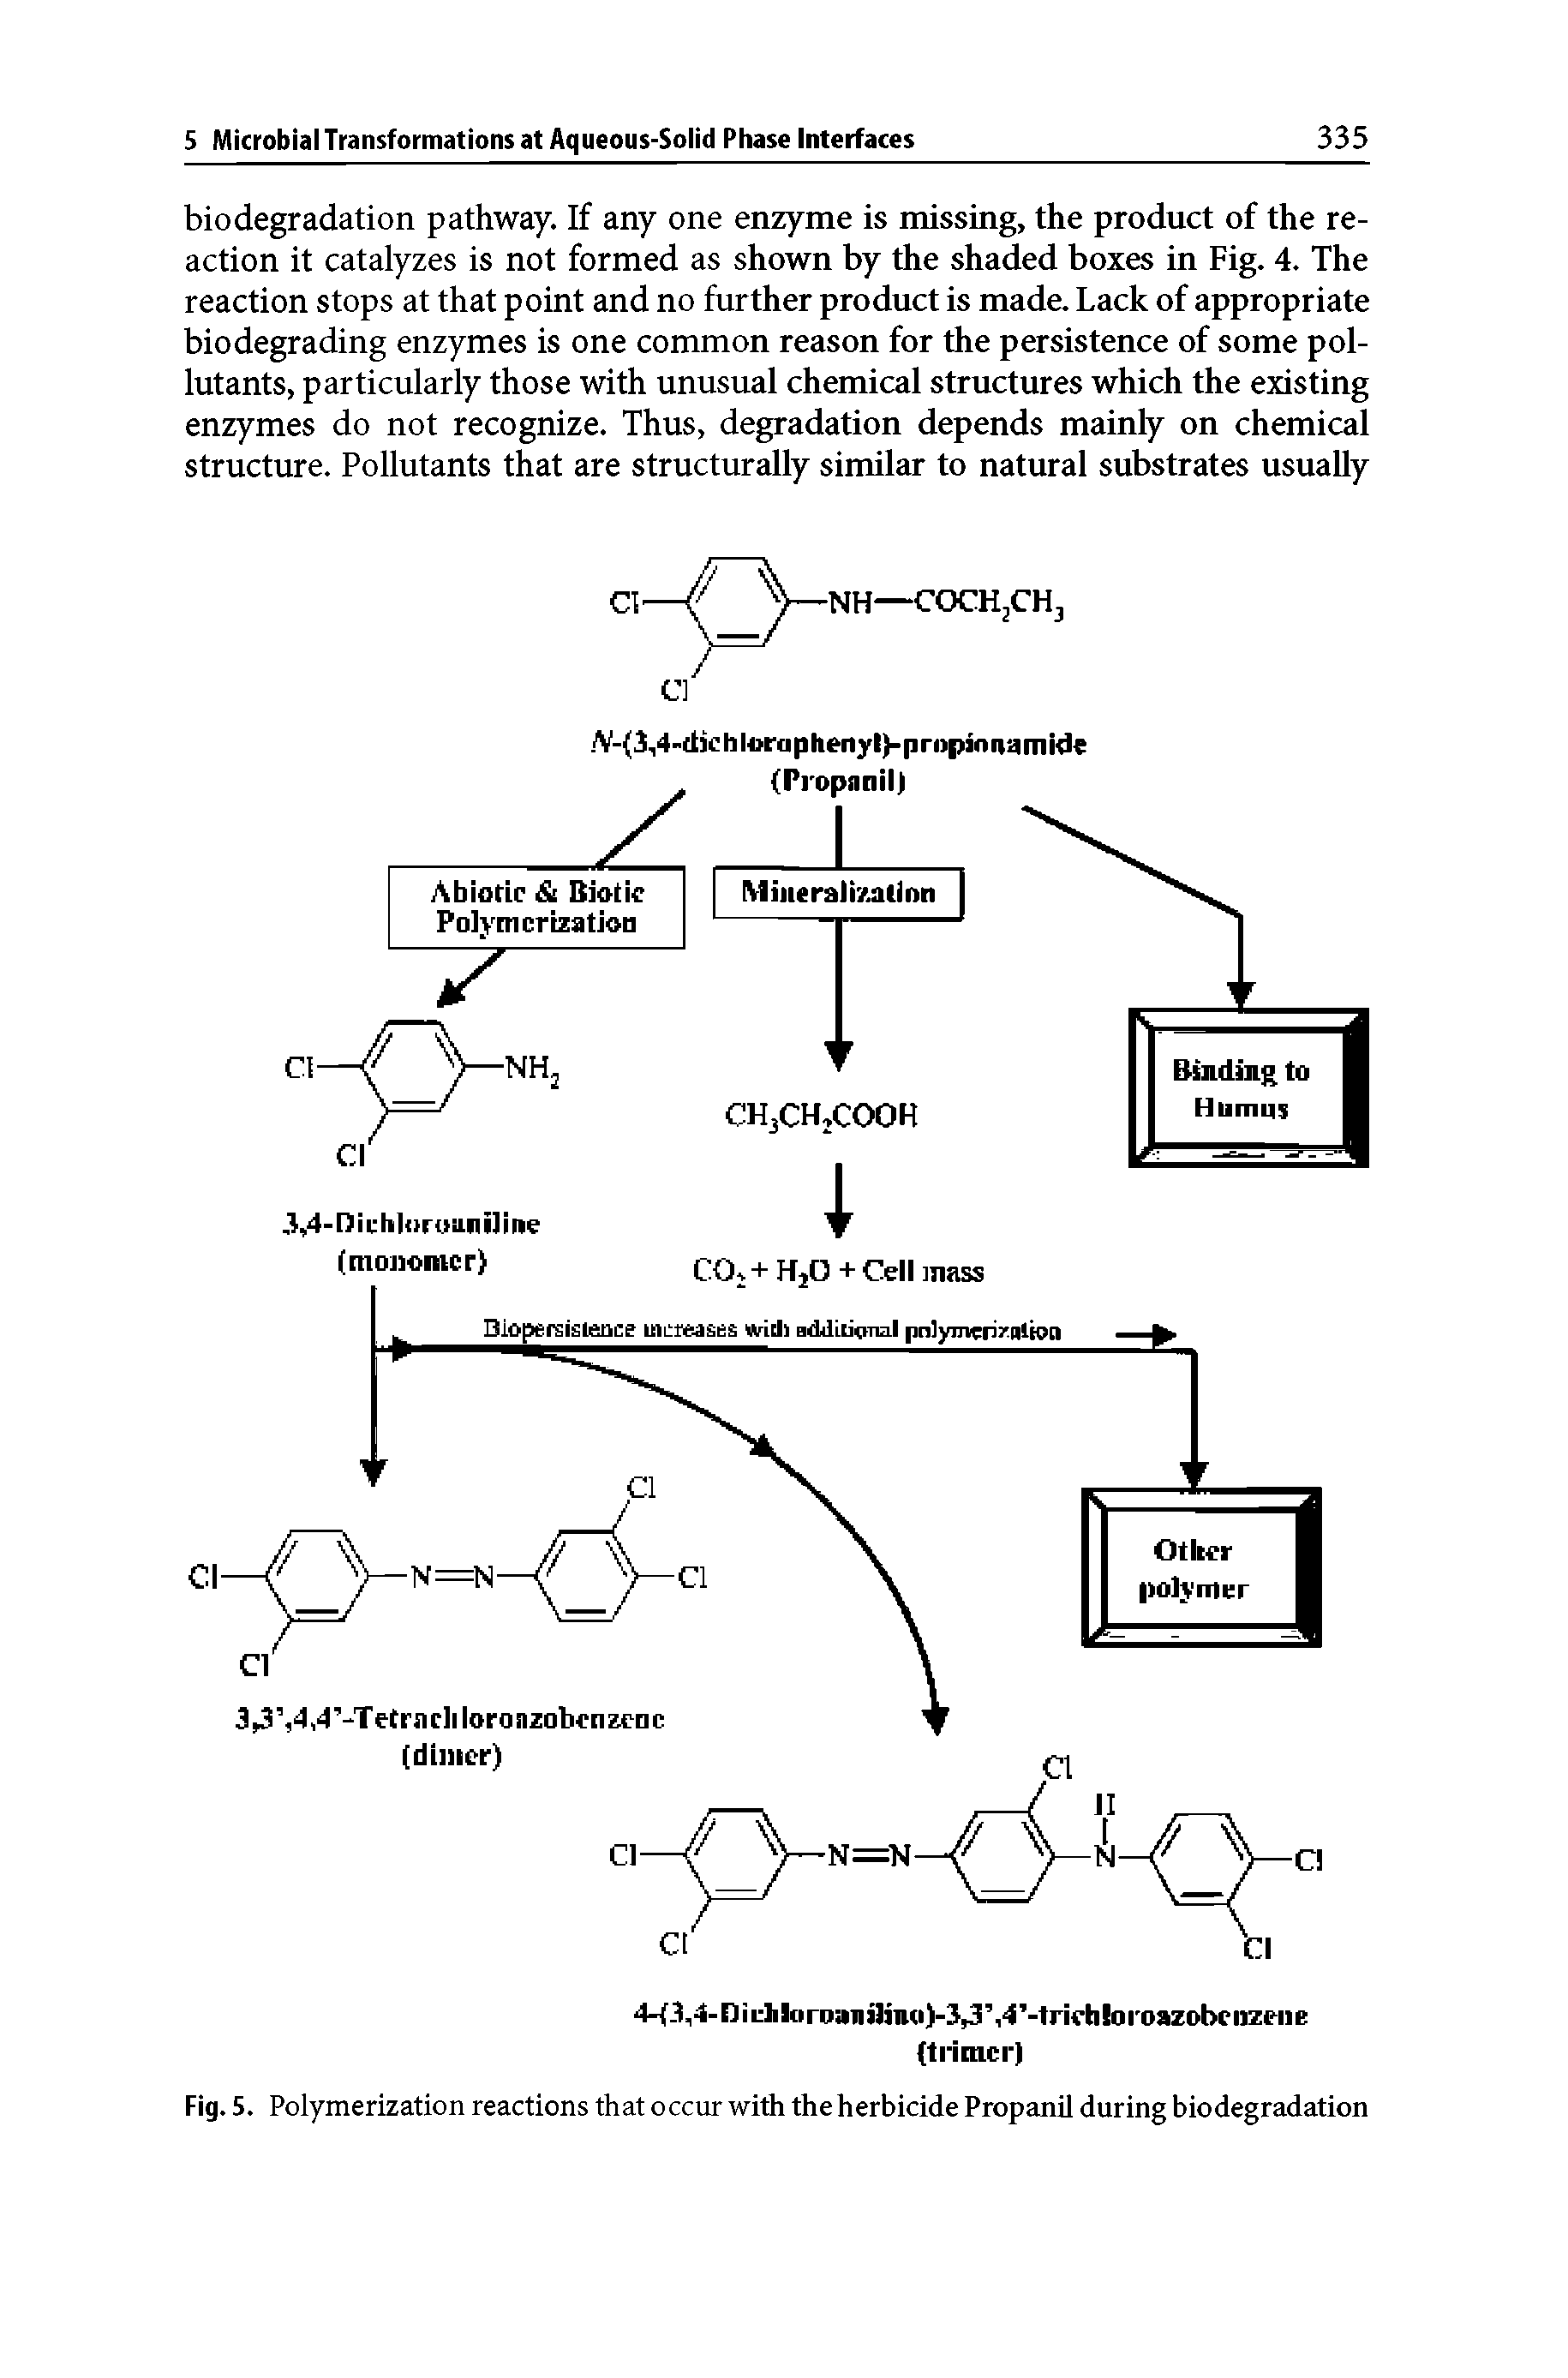 Fig. 5. Polymerization reactions that occur with the herbicide Propanil during biodegradation...